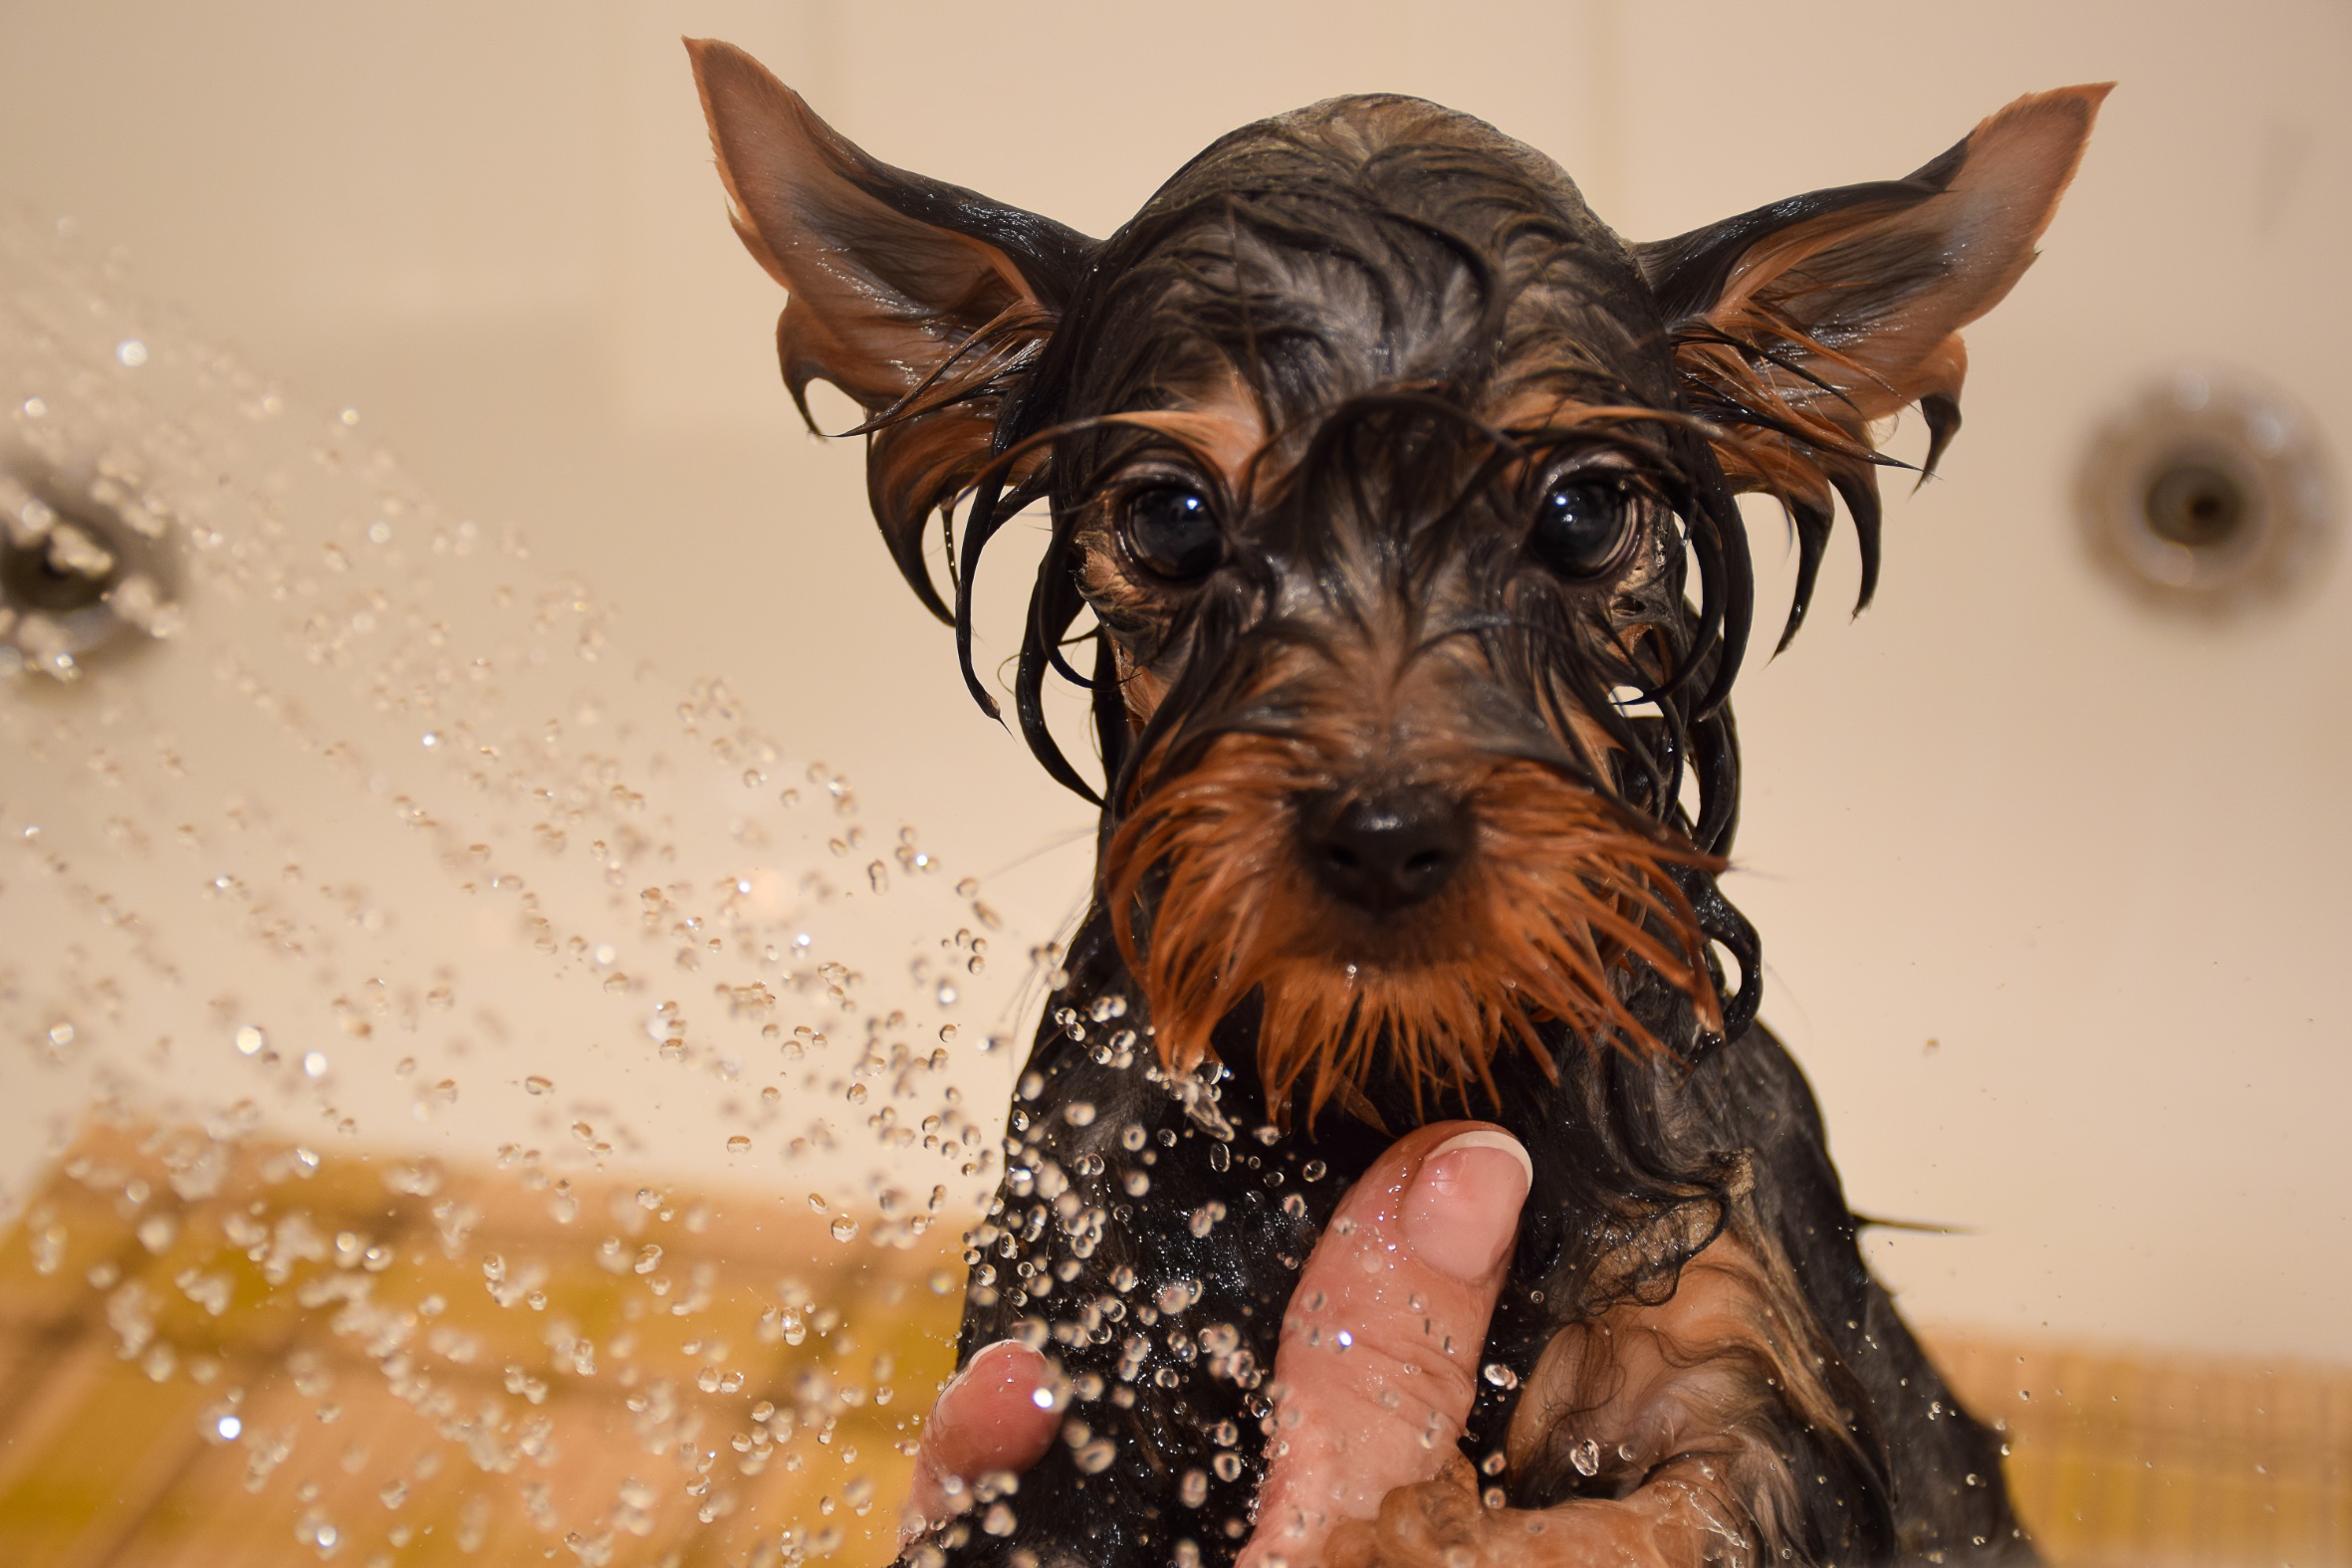 Dog in the bathroom at home. Puppy Yorkshire terrier takes a warm shower. Wet dog.; Shutterstock ID 1247622904; Purchase Order: B2C Com